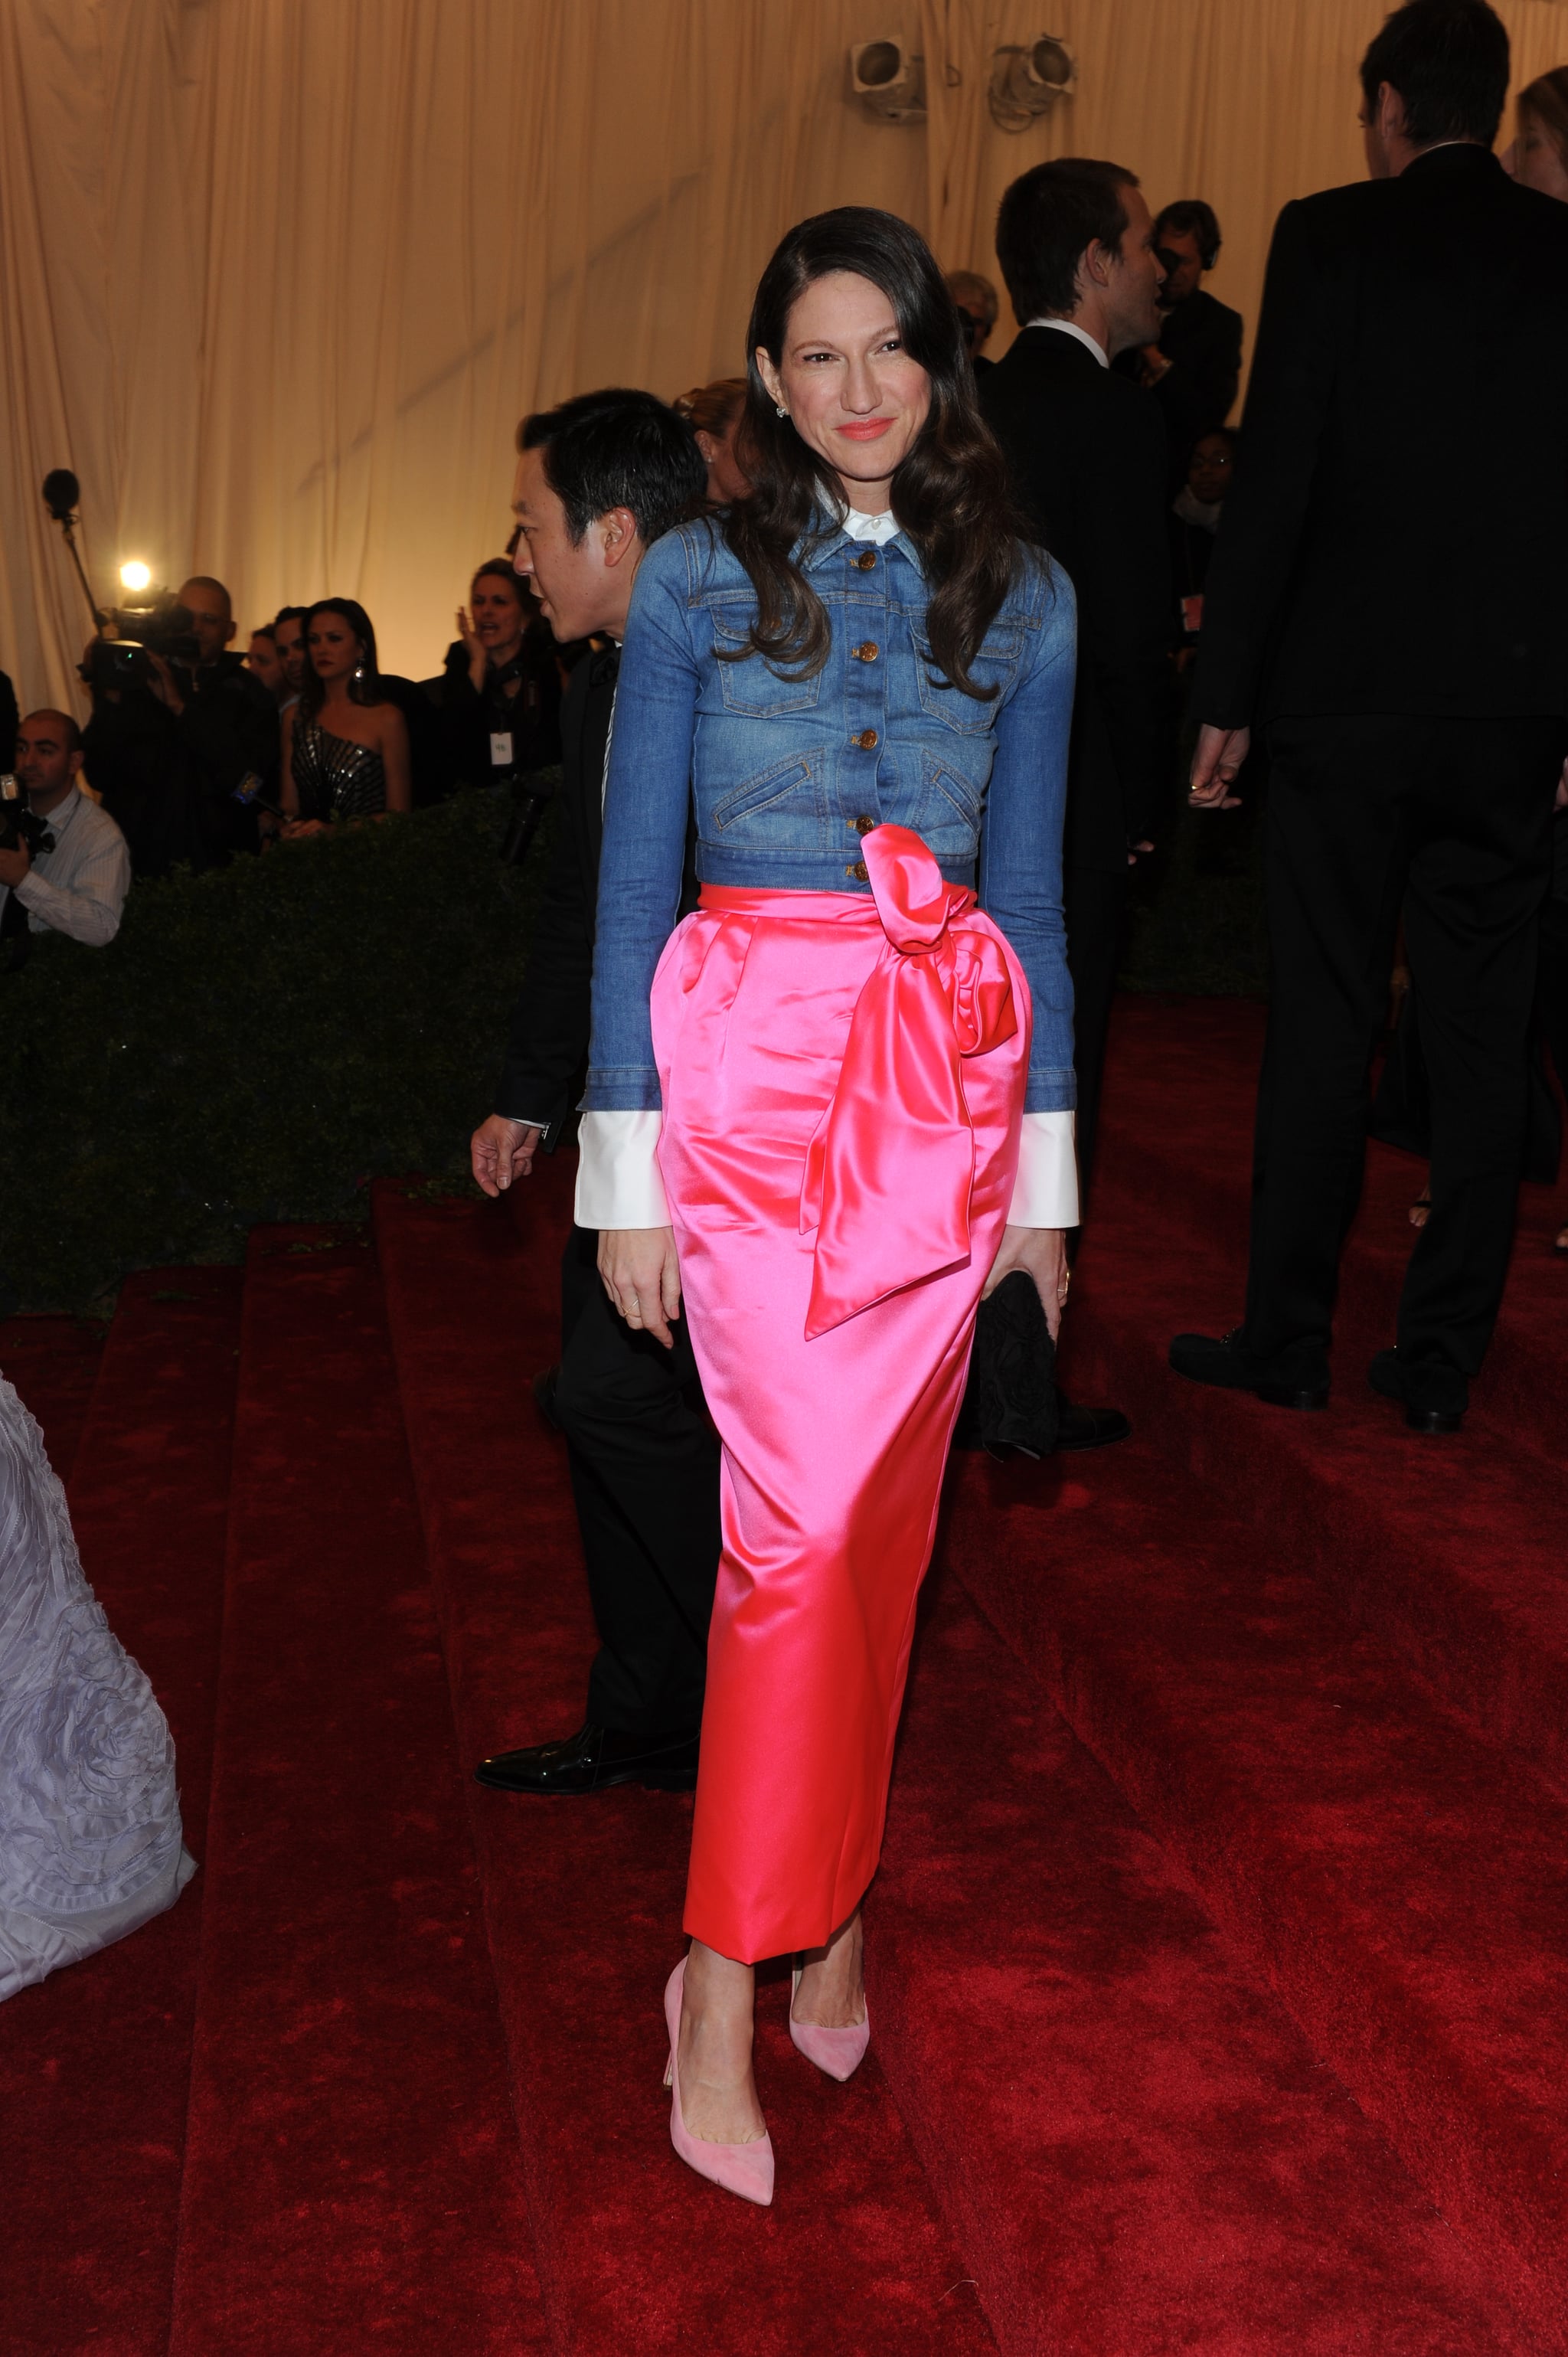 Jenna Lyons attends the Metropolitan Museum of Art's 2012 Costume Institute Gala featuring the debut of 